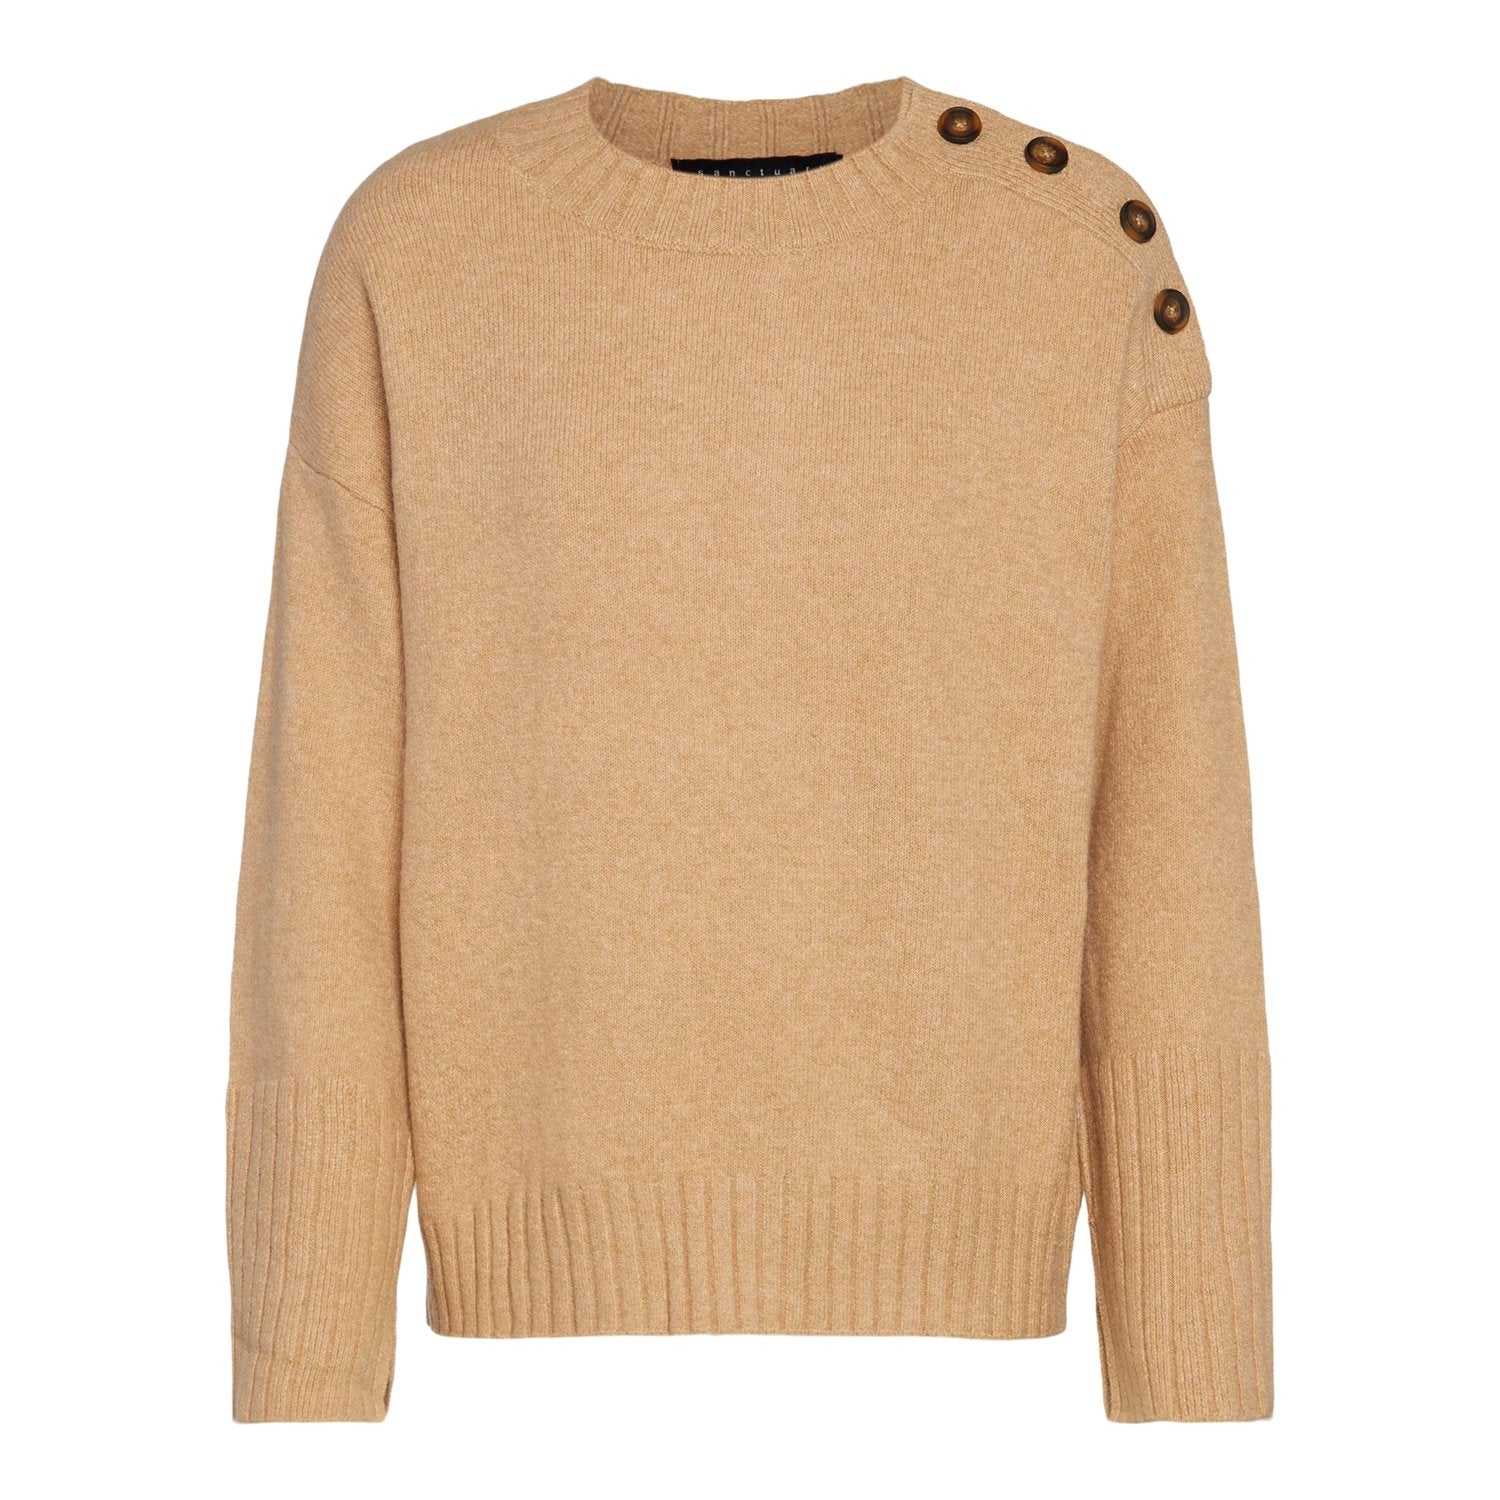 On Arrival Shoulder Button Sweater